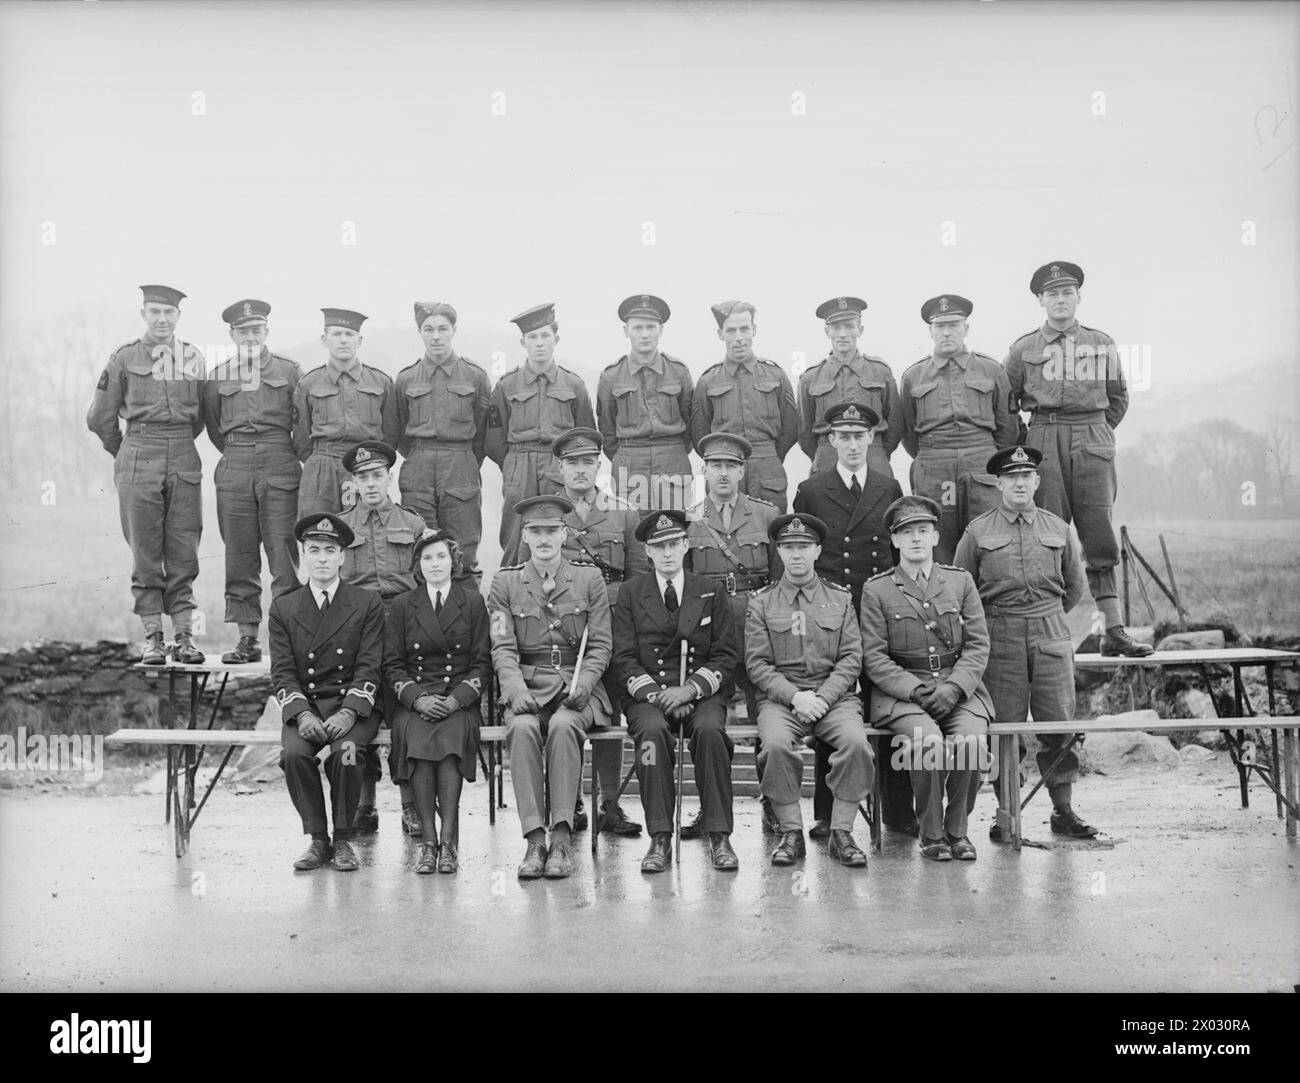 GROUP PHOTOGRAPHS AT A COMBINED SIGNAL SCHOOL. 28 JANUARY 1942, INVERARAY. - Officers and instructors of a Combined Signal School Stock Photo